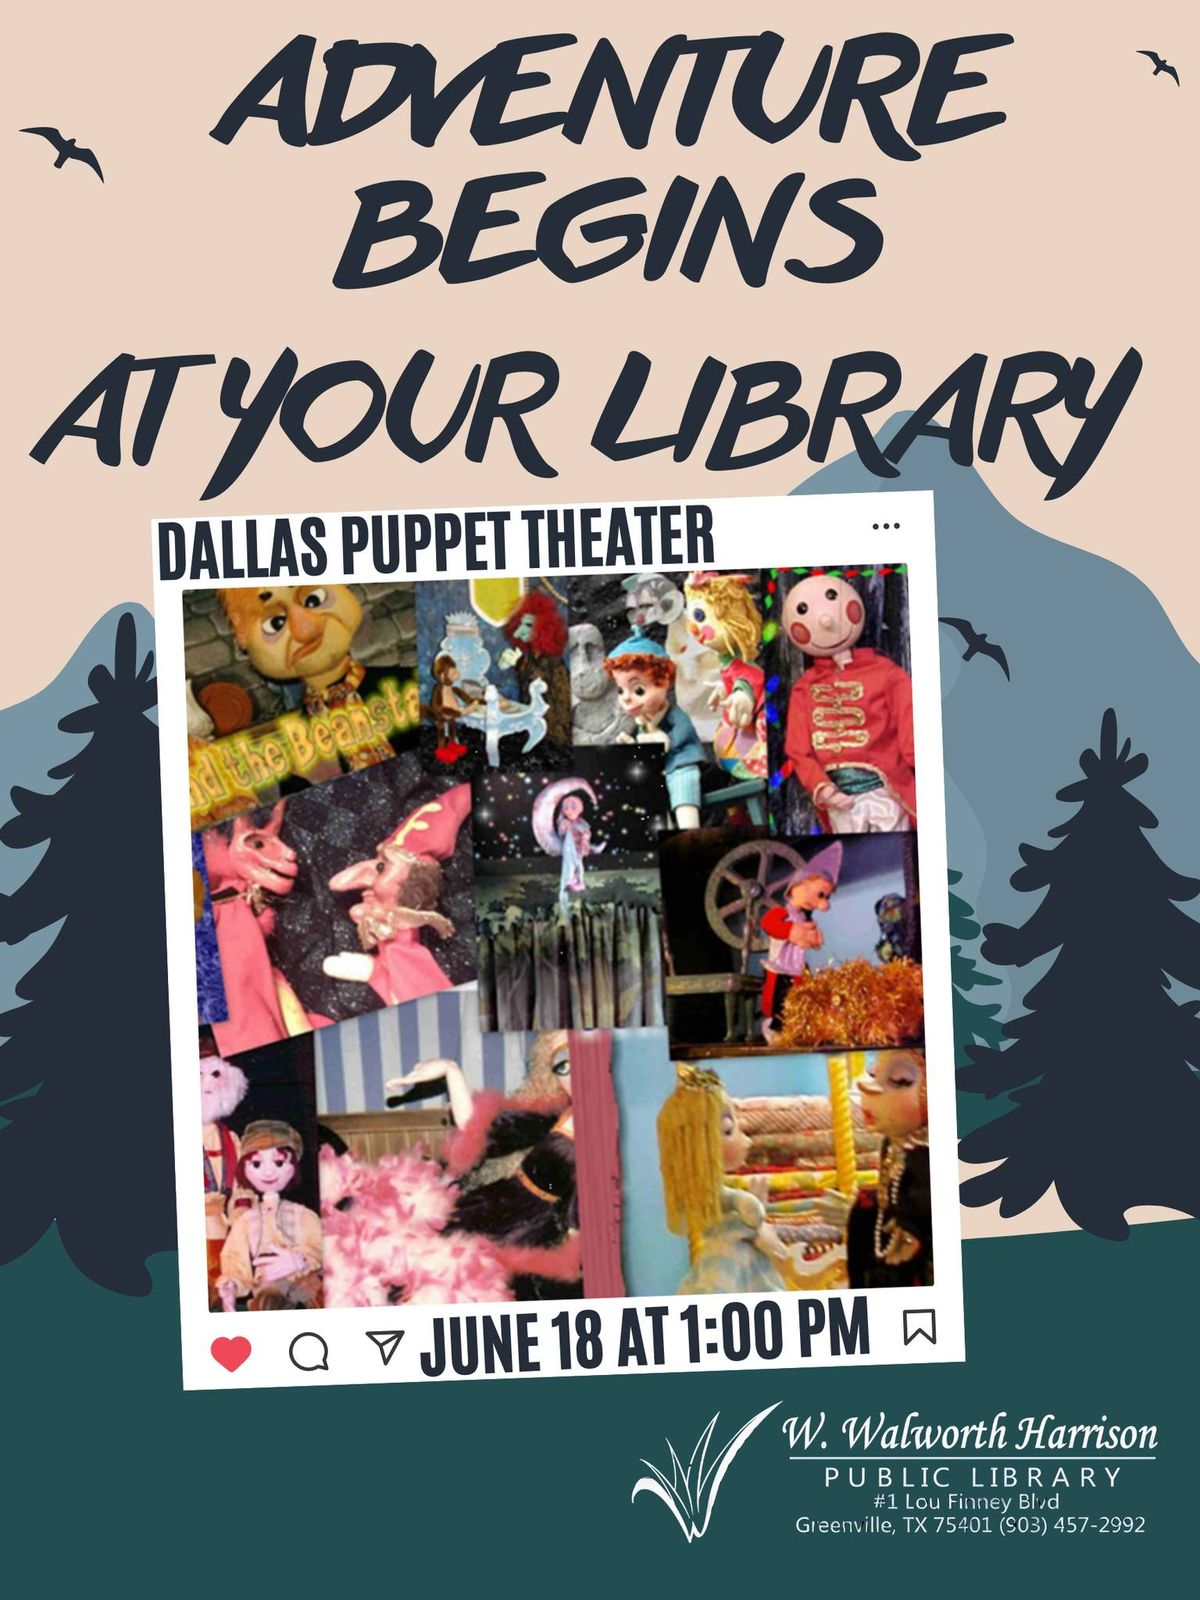 Adventure with the Dallas Puppet Theater